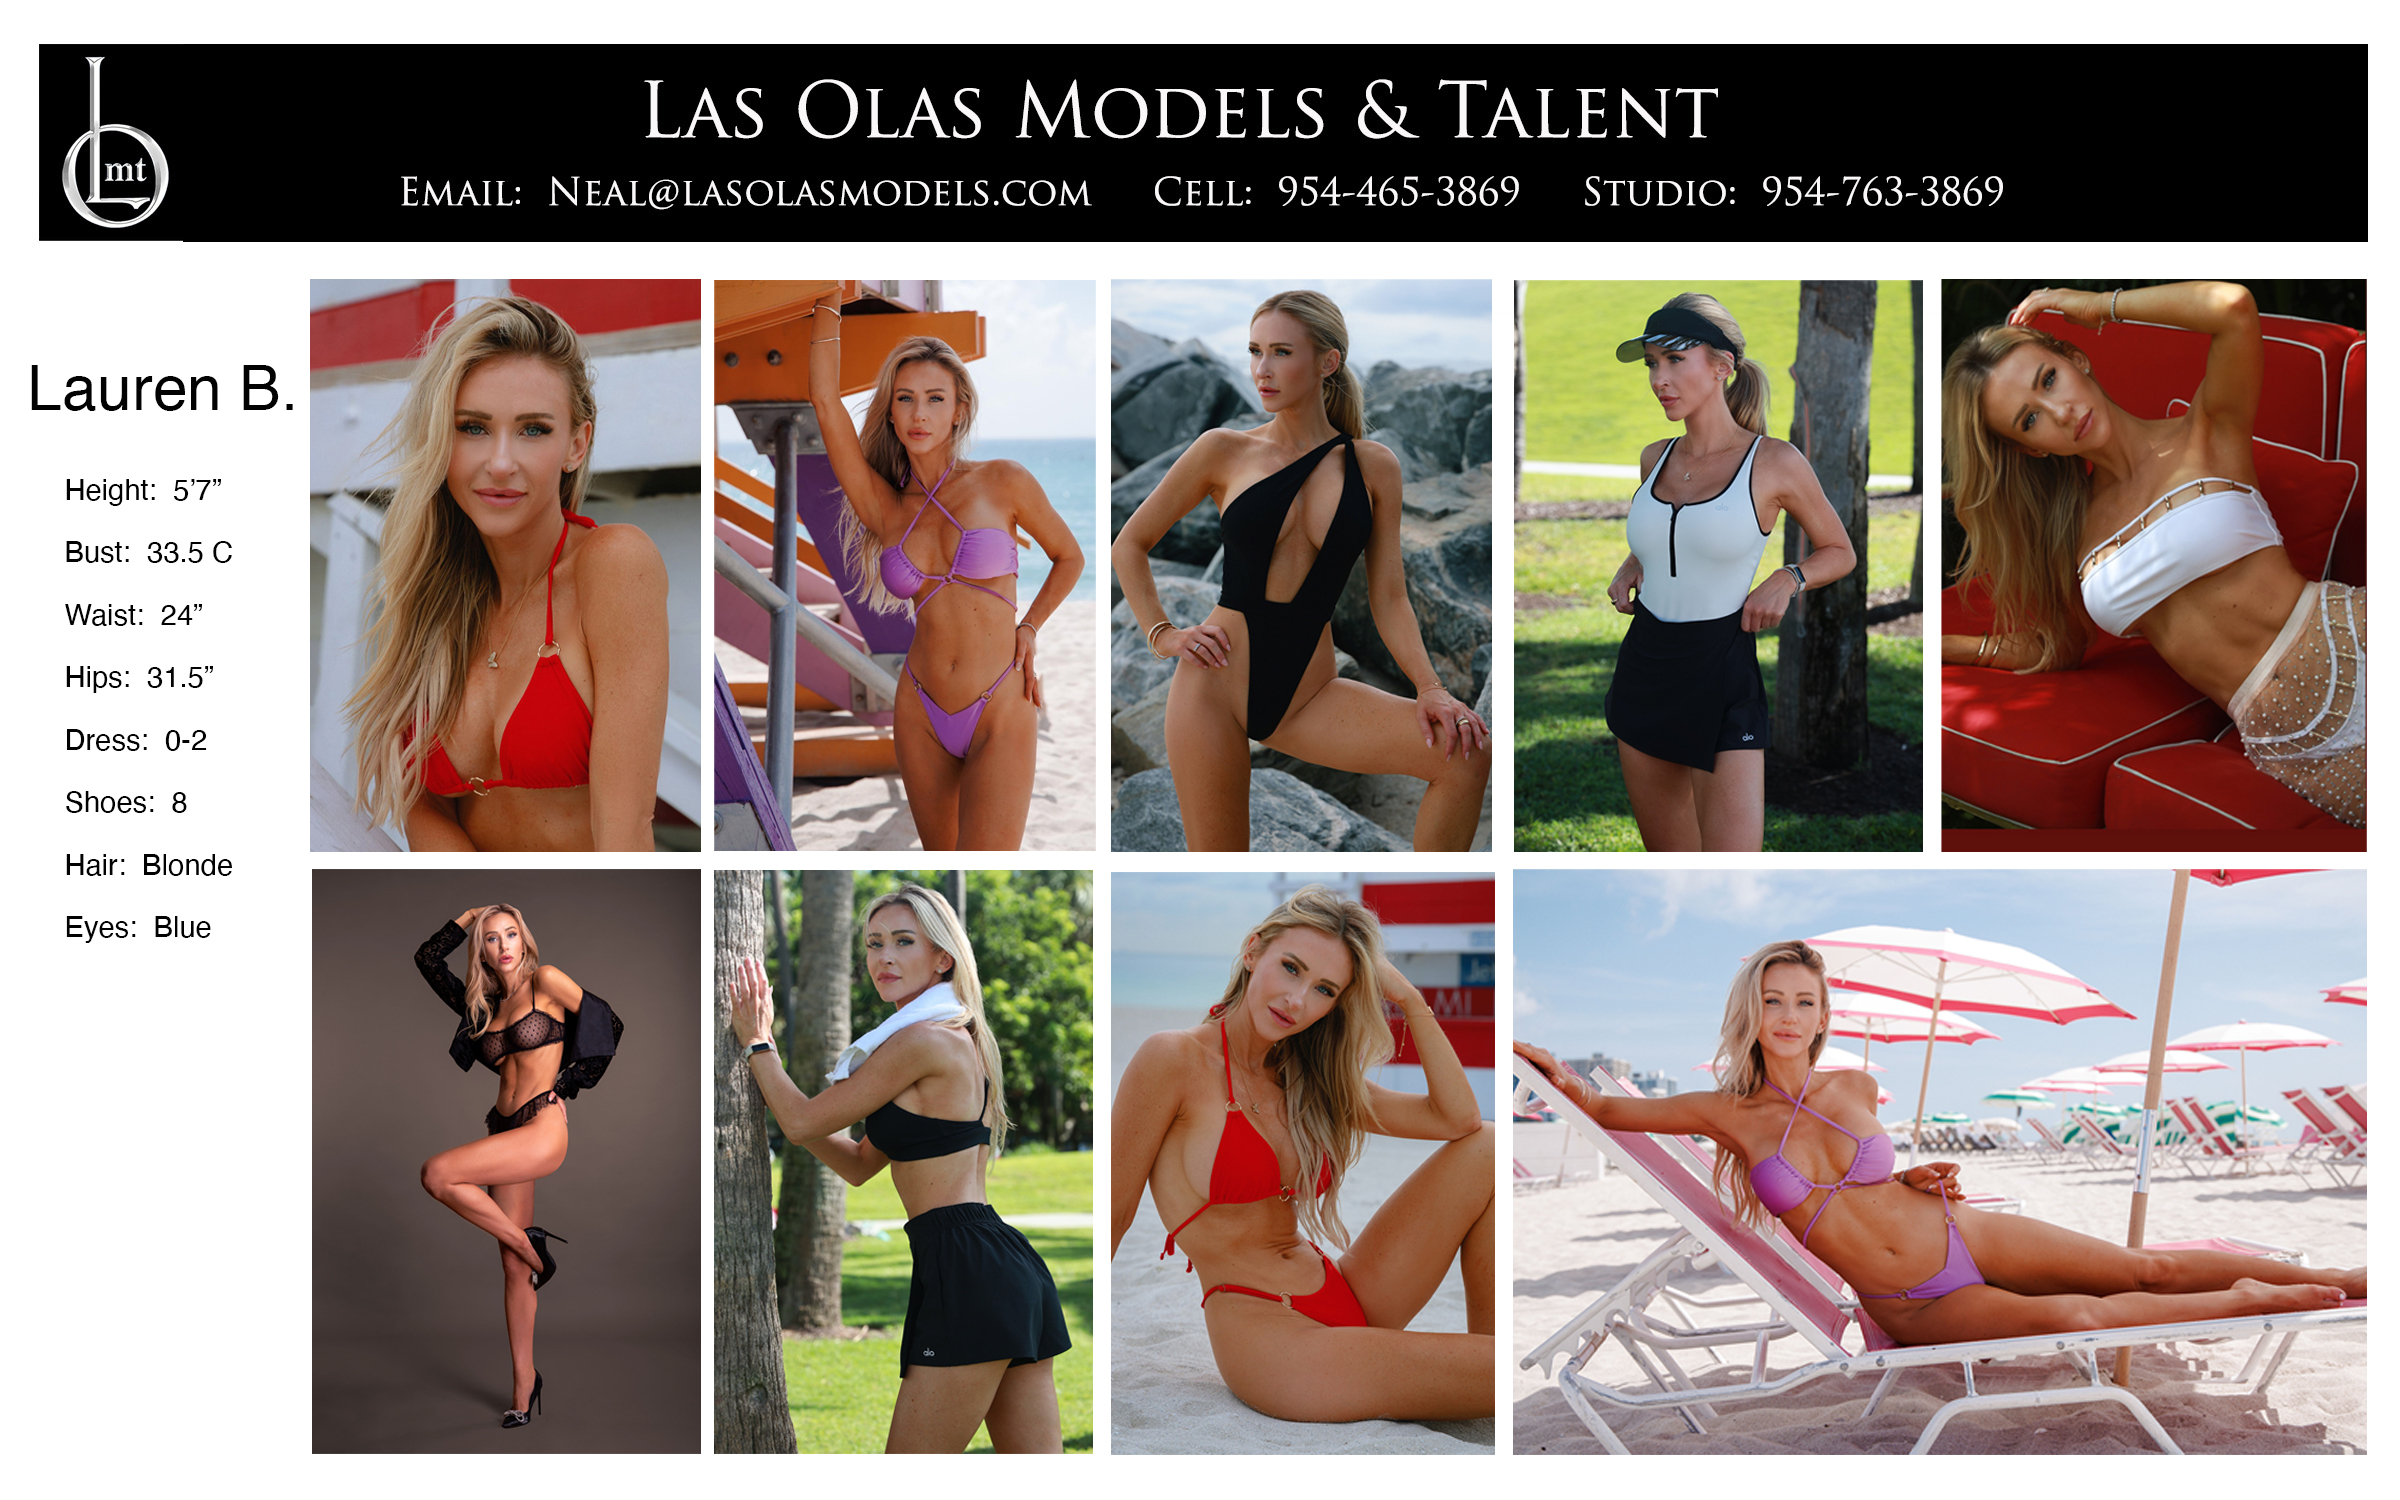 Female Model - Anna I  - Fort Lauderdale - Miami - South Florida - Palm Beach - Las Olas Models and Talent Ft. Lauderdale - Anna I Comp